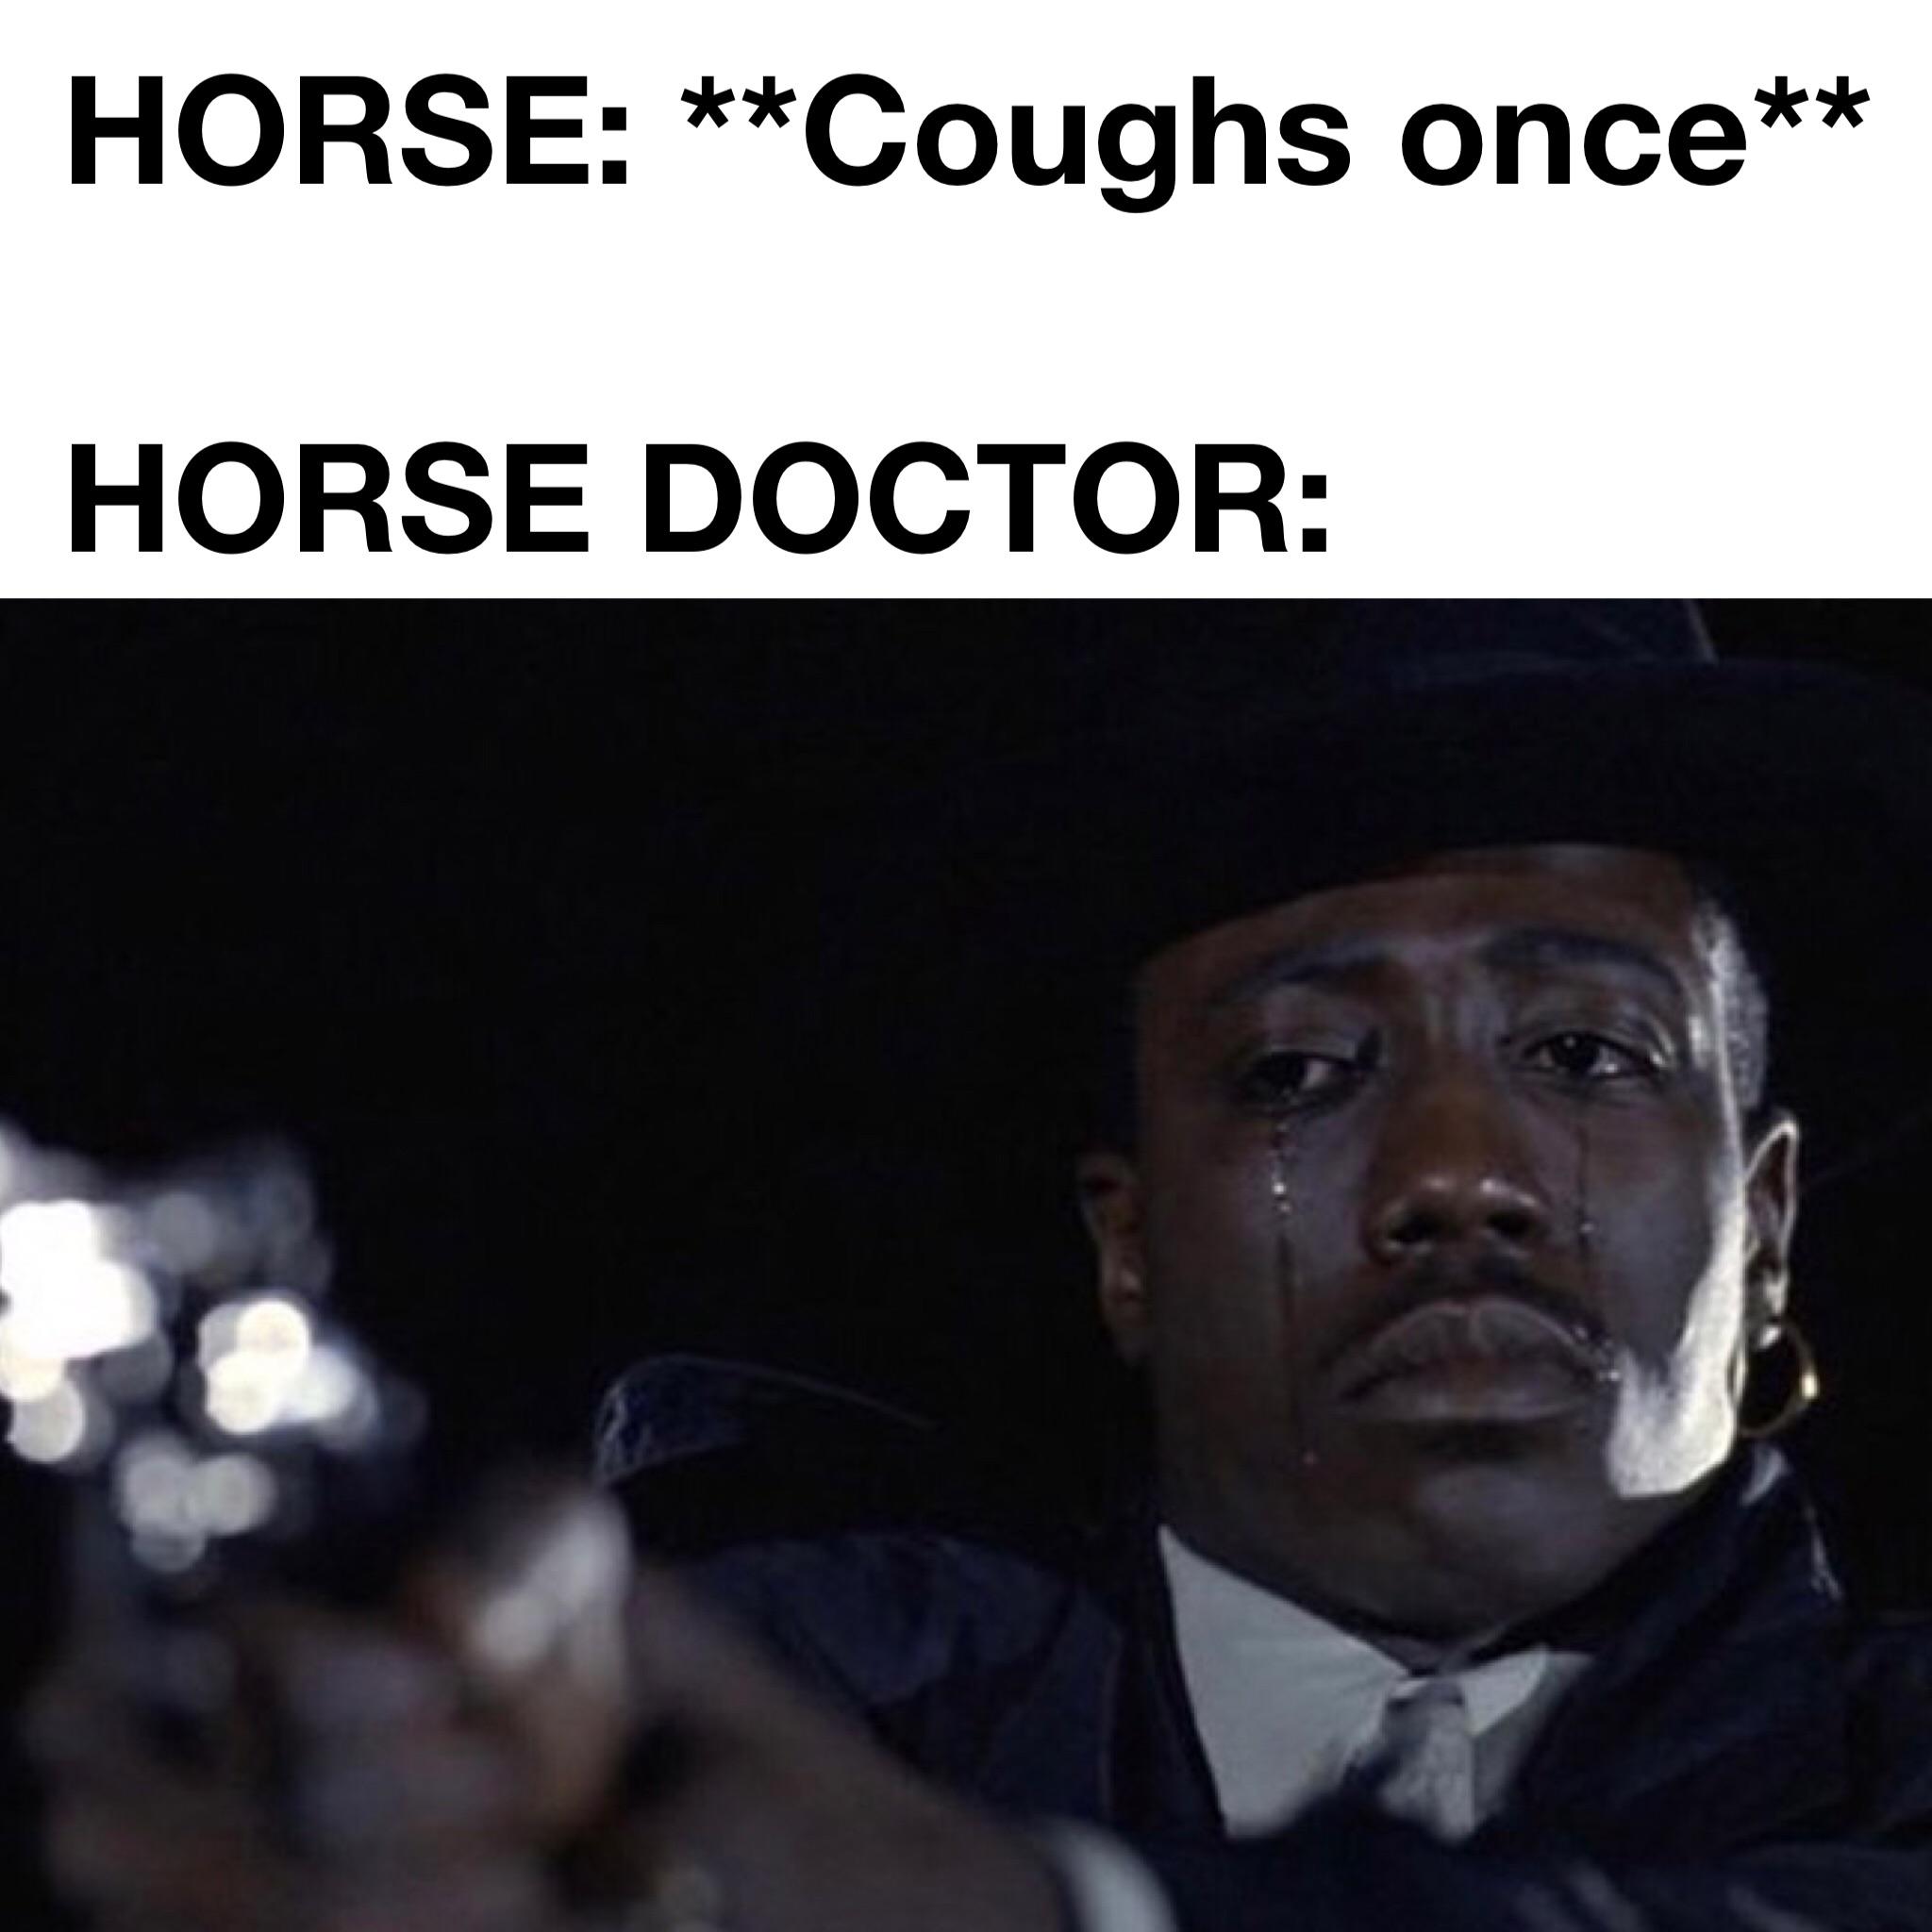 photo caption - Horse Coughs once Horse Doctor